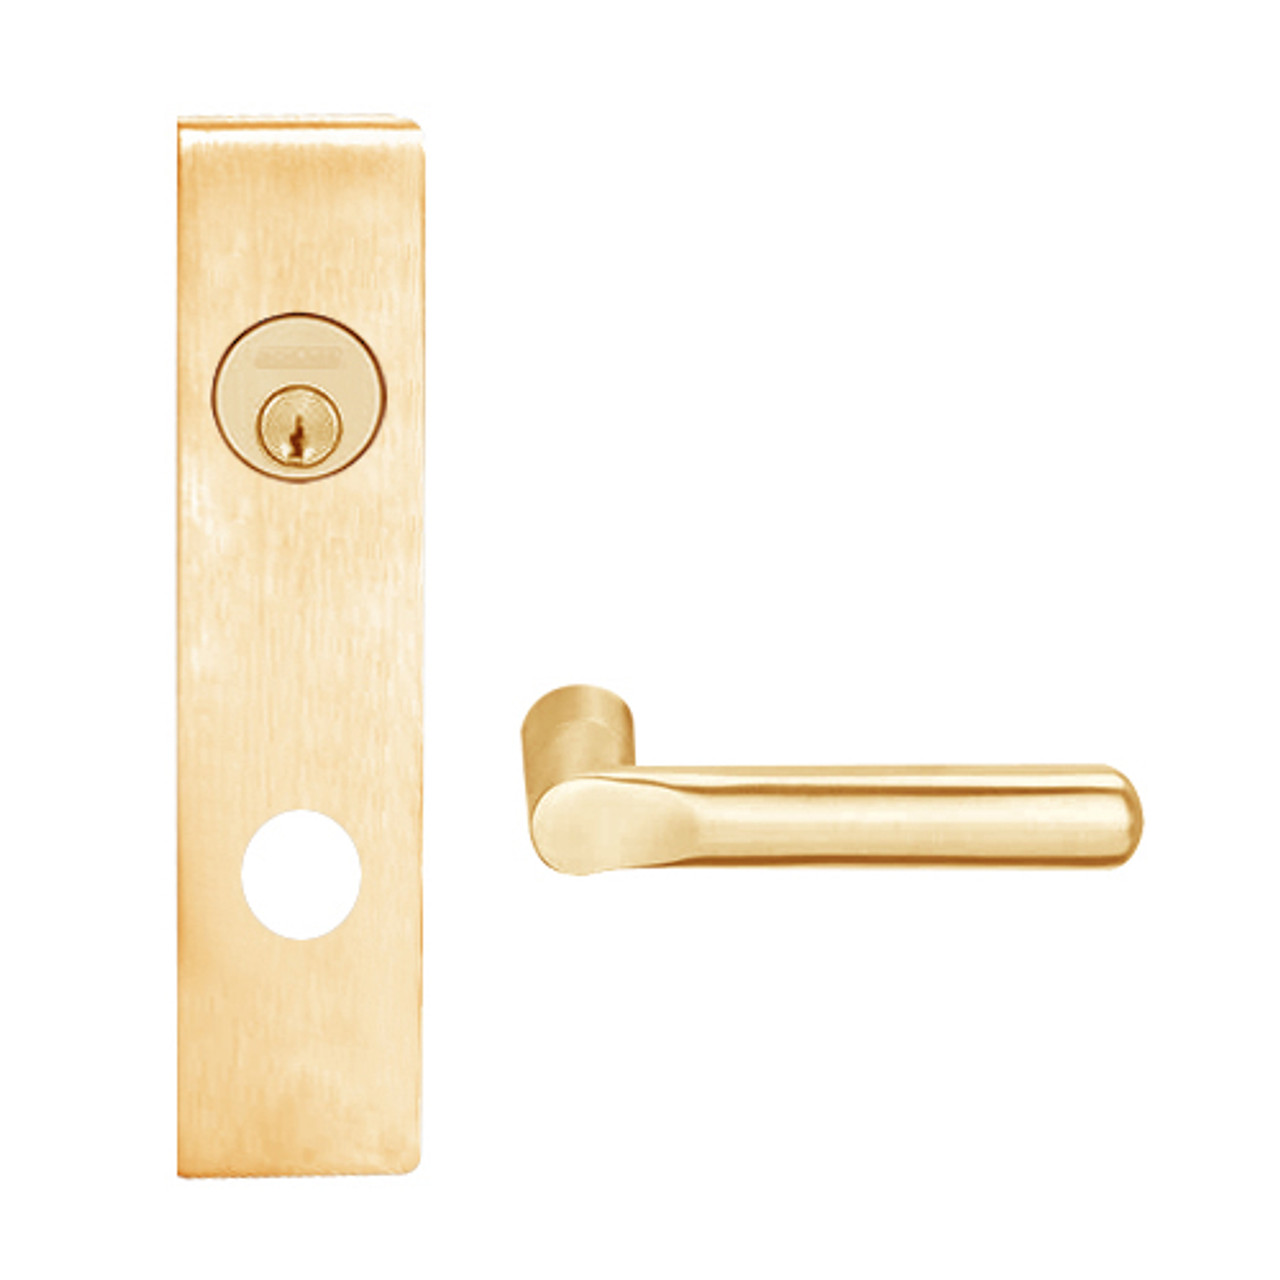 L9456L-18L-612 Schlage L Series Less Cylinder Corridor with Deadbolt Commercial Mortise Lock with 18 Cast Lever Design in Satin Bronze